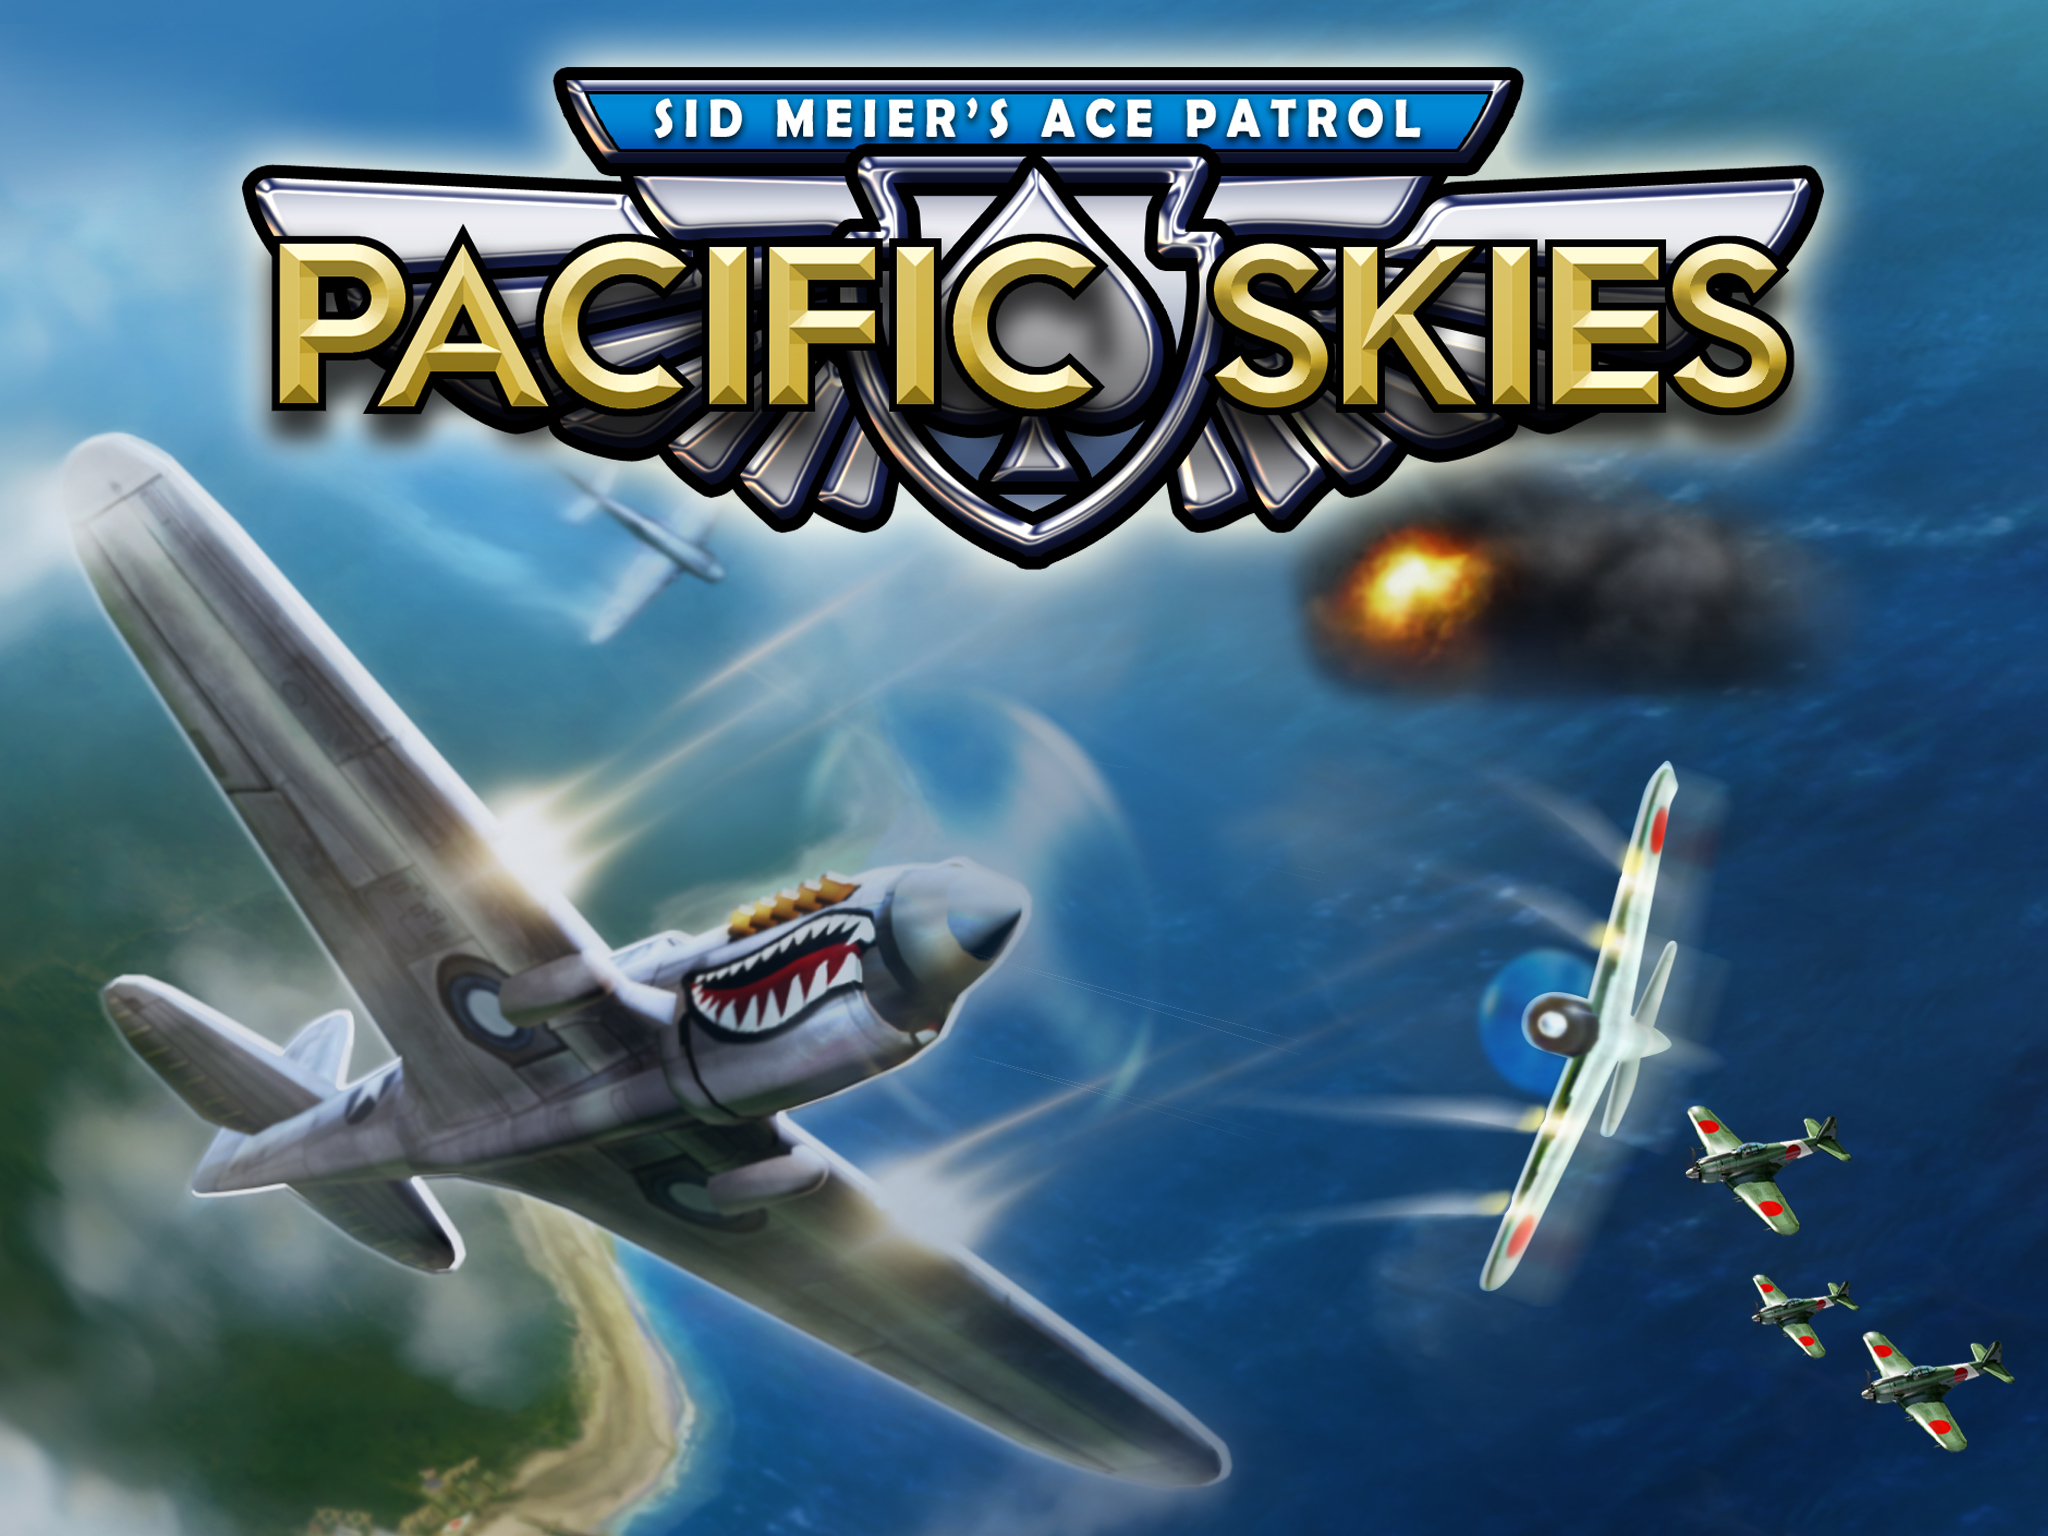 Sid Meier’s Ace Patrol: Pacific Skies for Steam and iOS